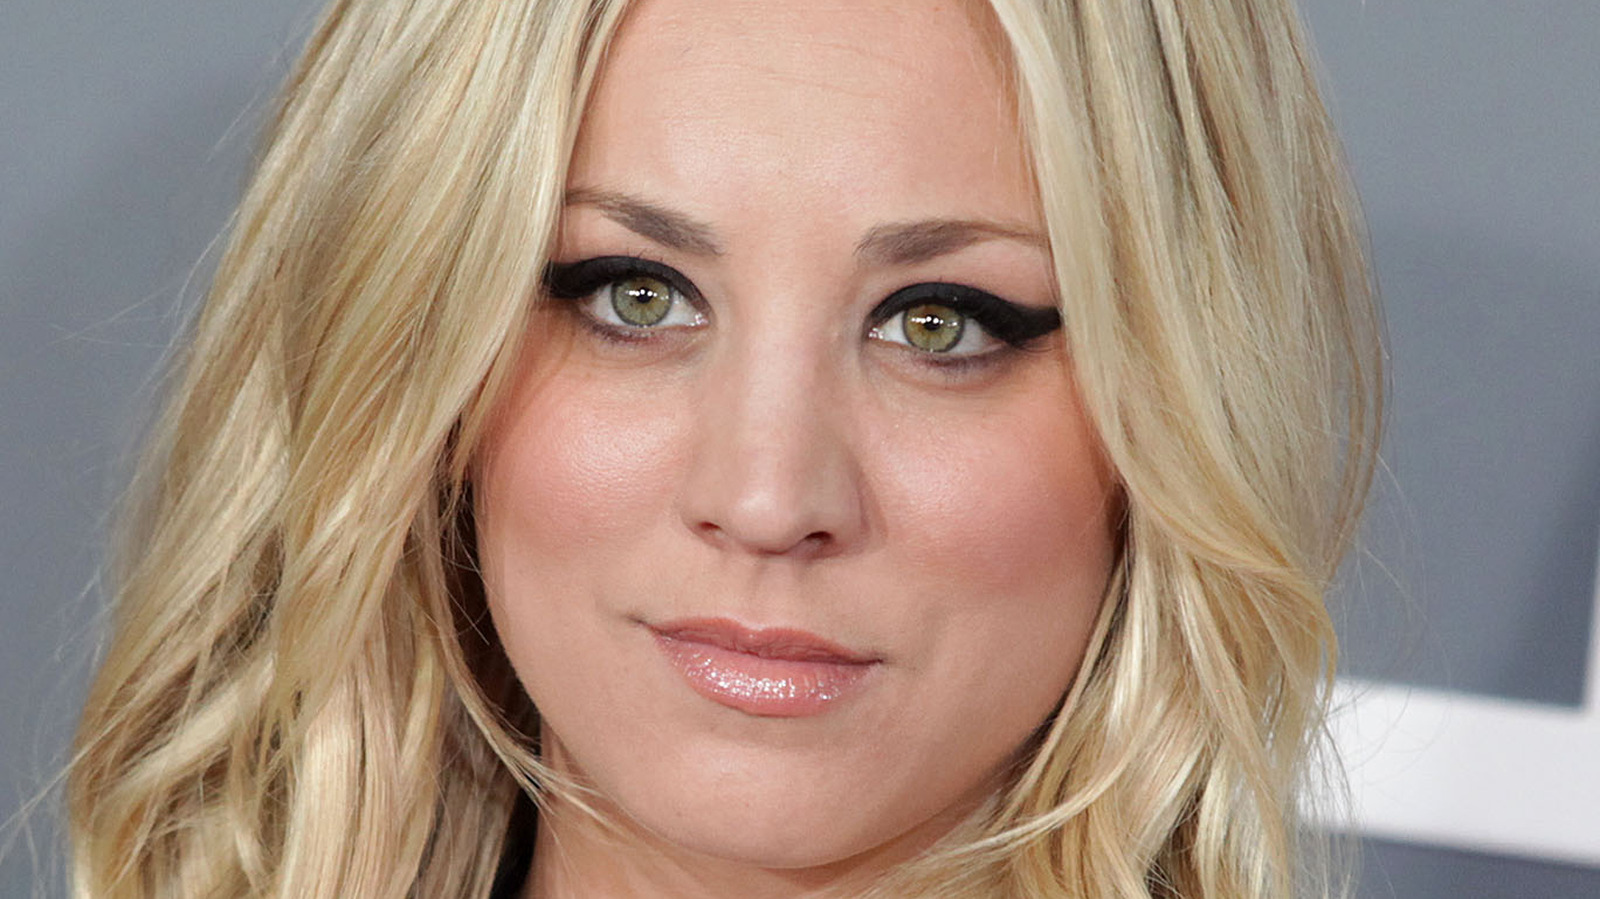 Kaley Cuoco Dildo Porn - Kaley Cuoco Shares A Surprising Secret About Filming The Flight Attendant